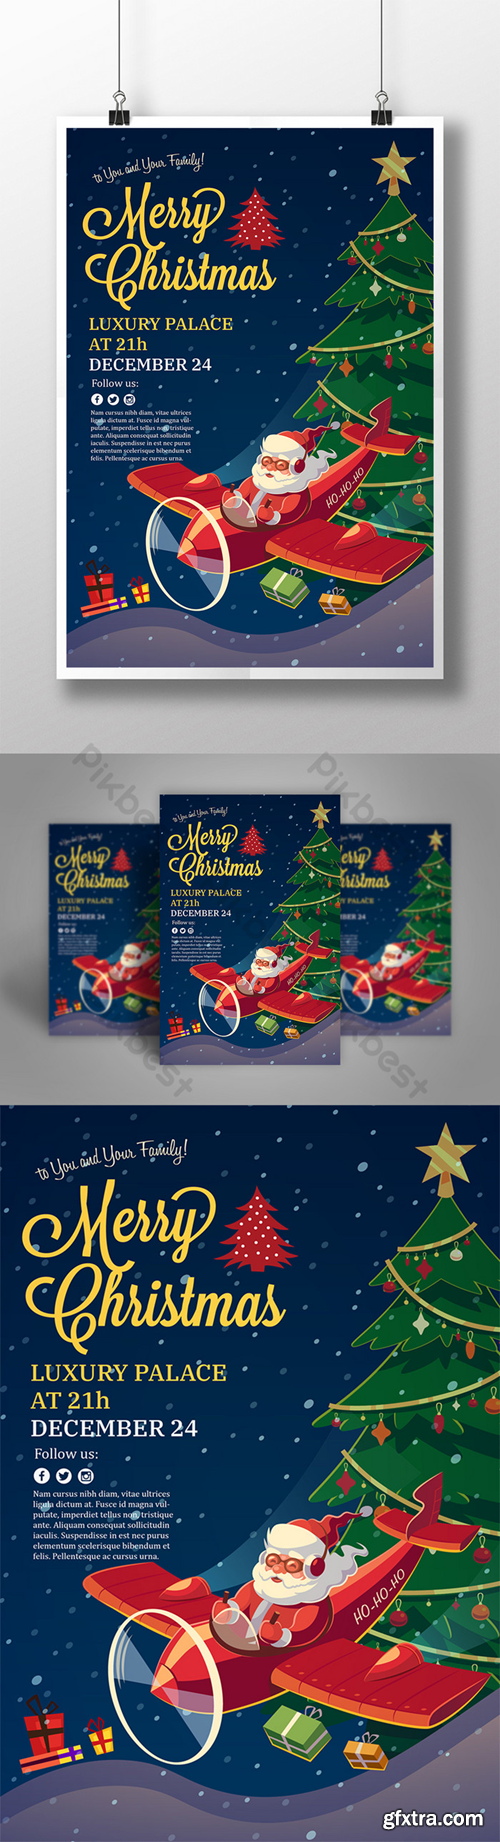 Merry Christmas Jingle Bell Tree Poster Template PSD